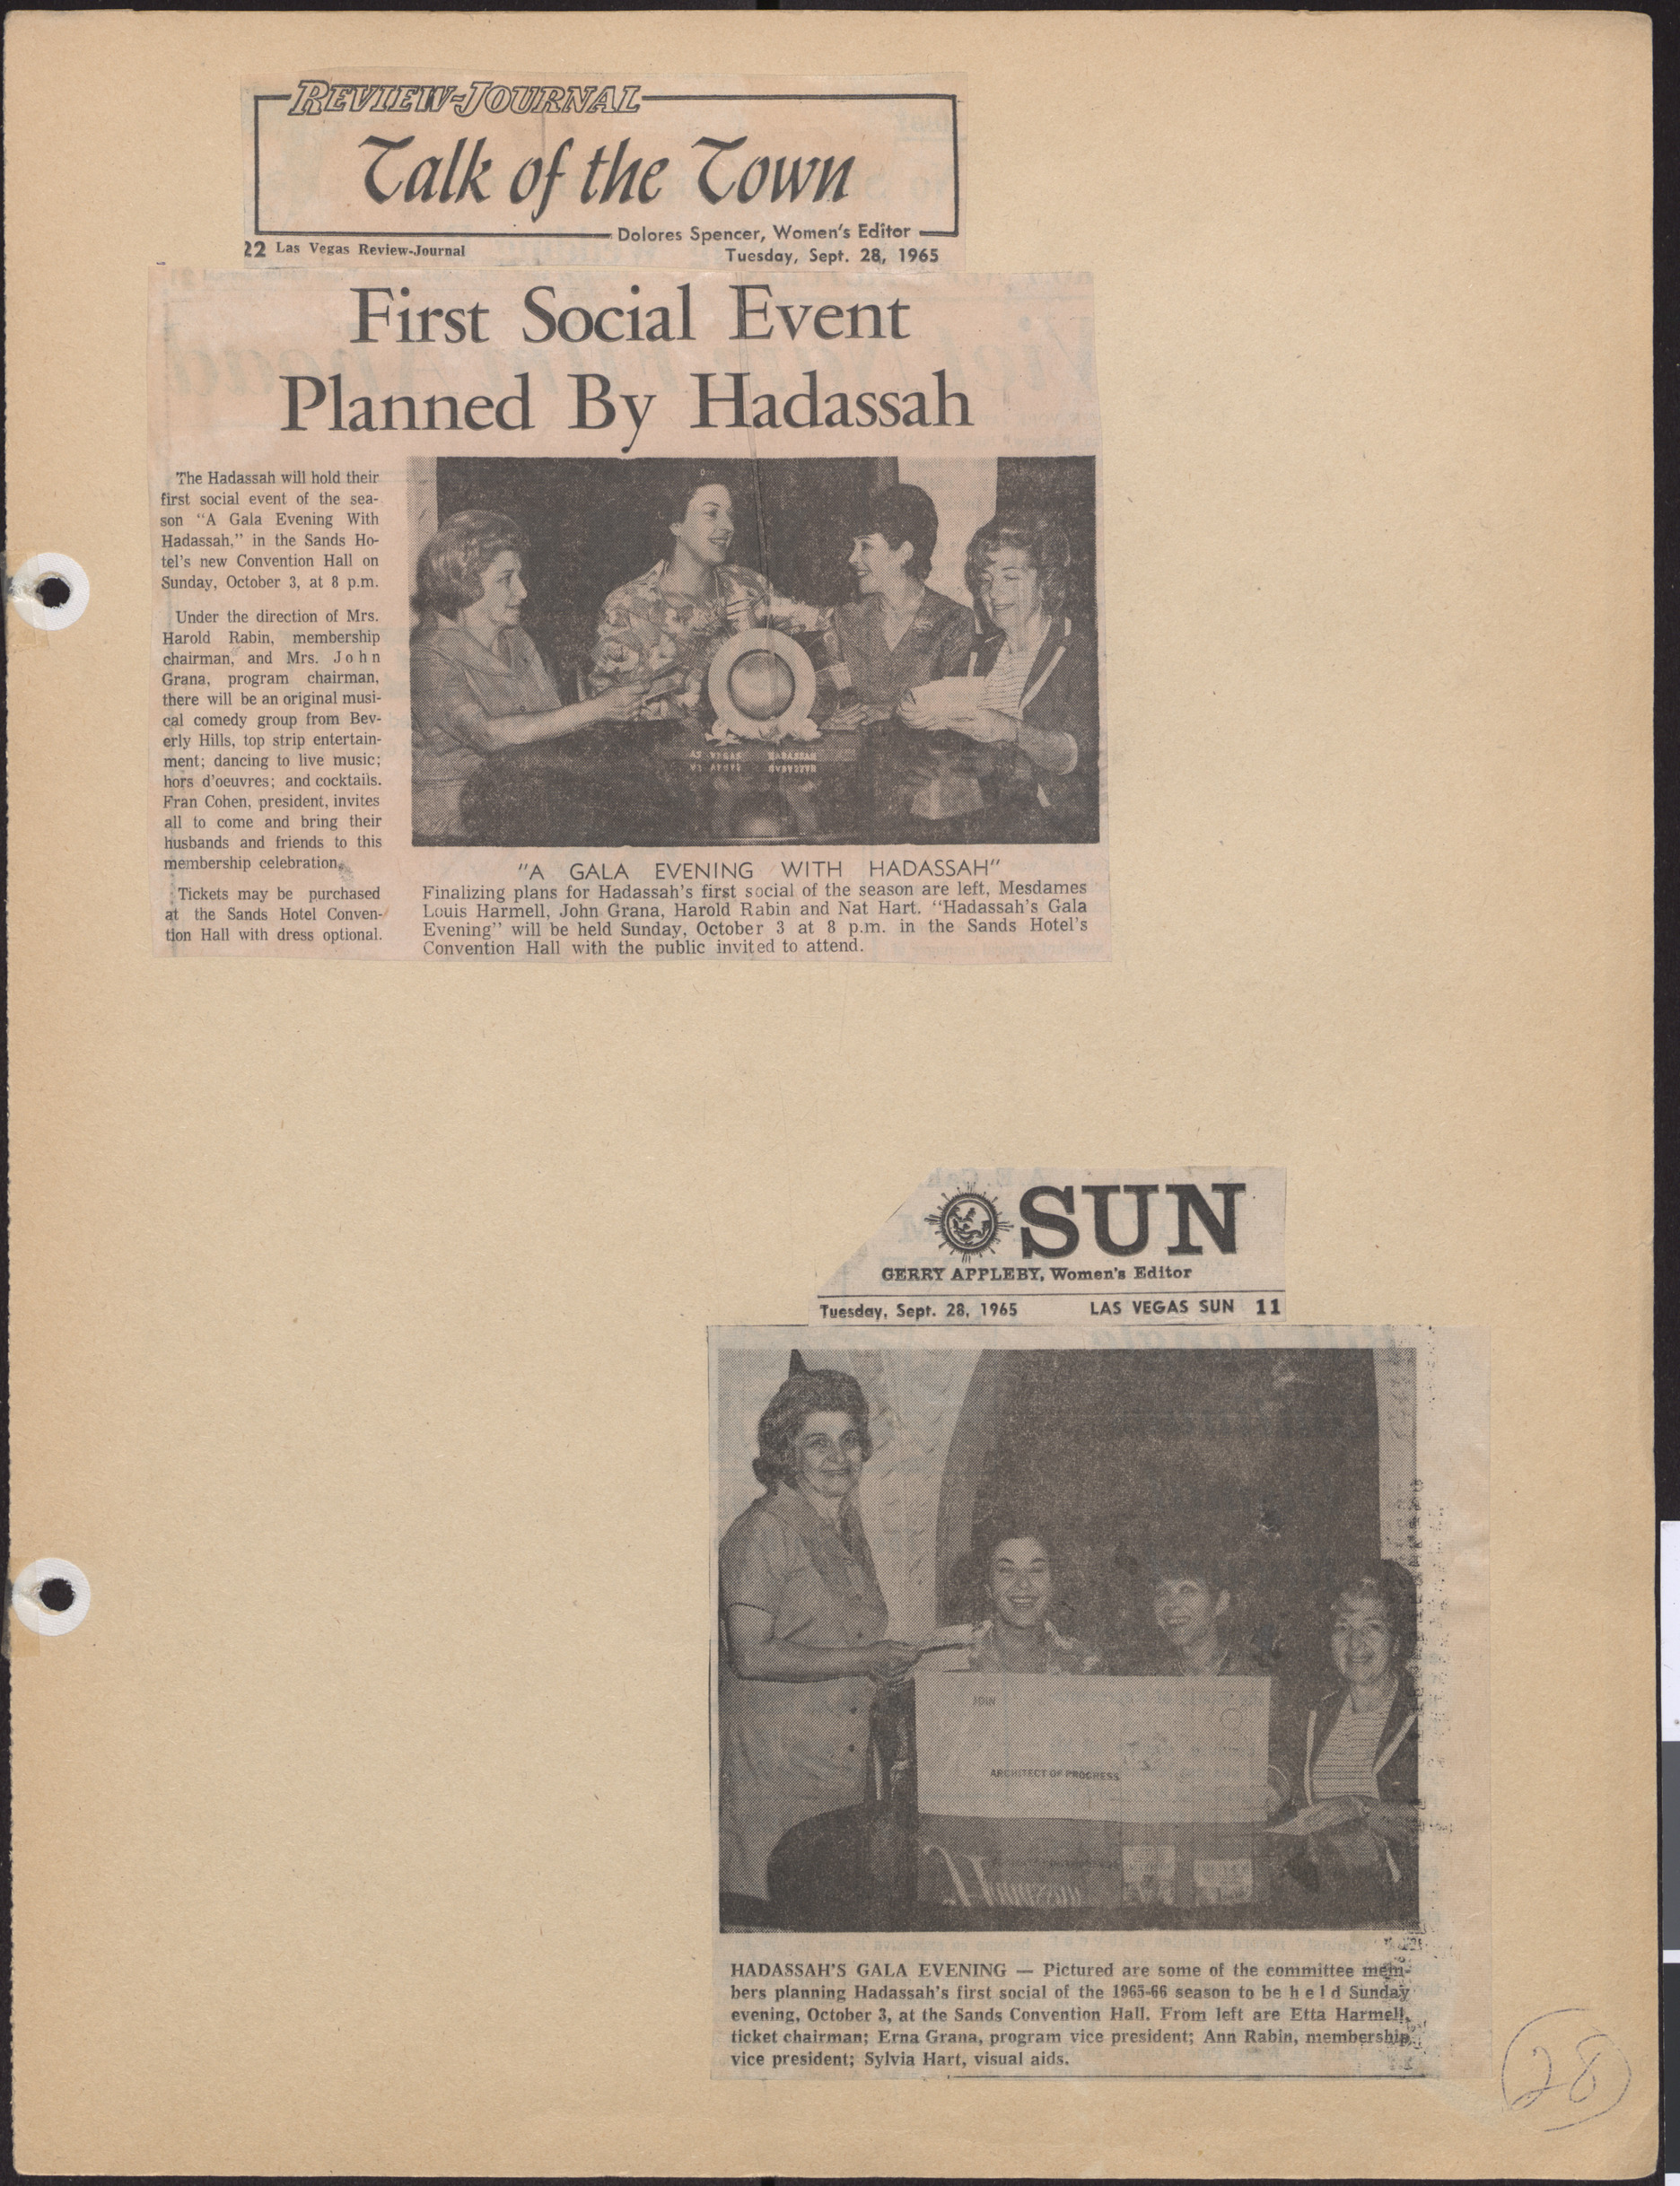 Newspaper clippings, First Social Event Planned by Hadassah, Las Vegas Review-Journal, September 28, 1965, and Hadassah's Gala Evening, Las Vegas Sun, September 28, 1965